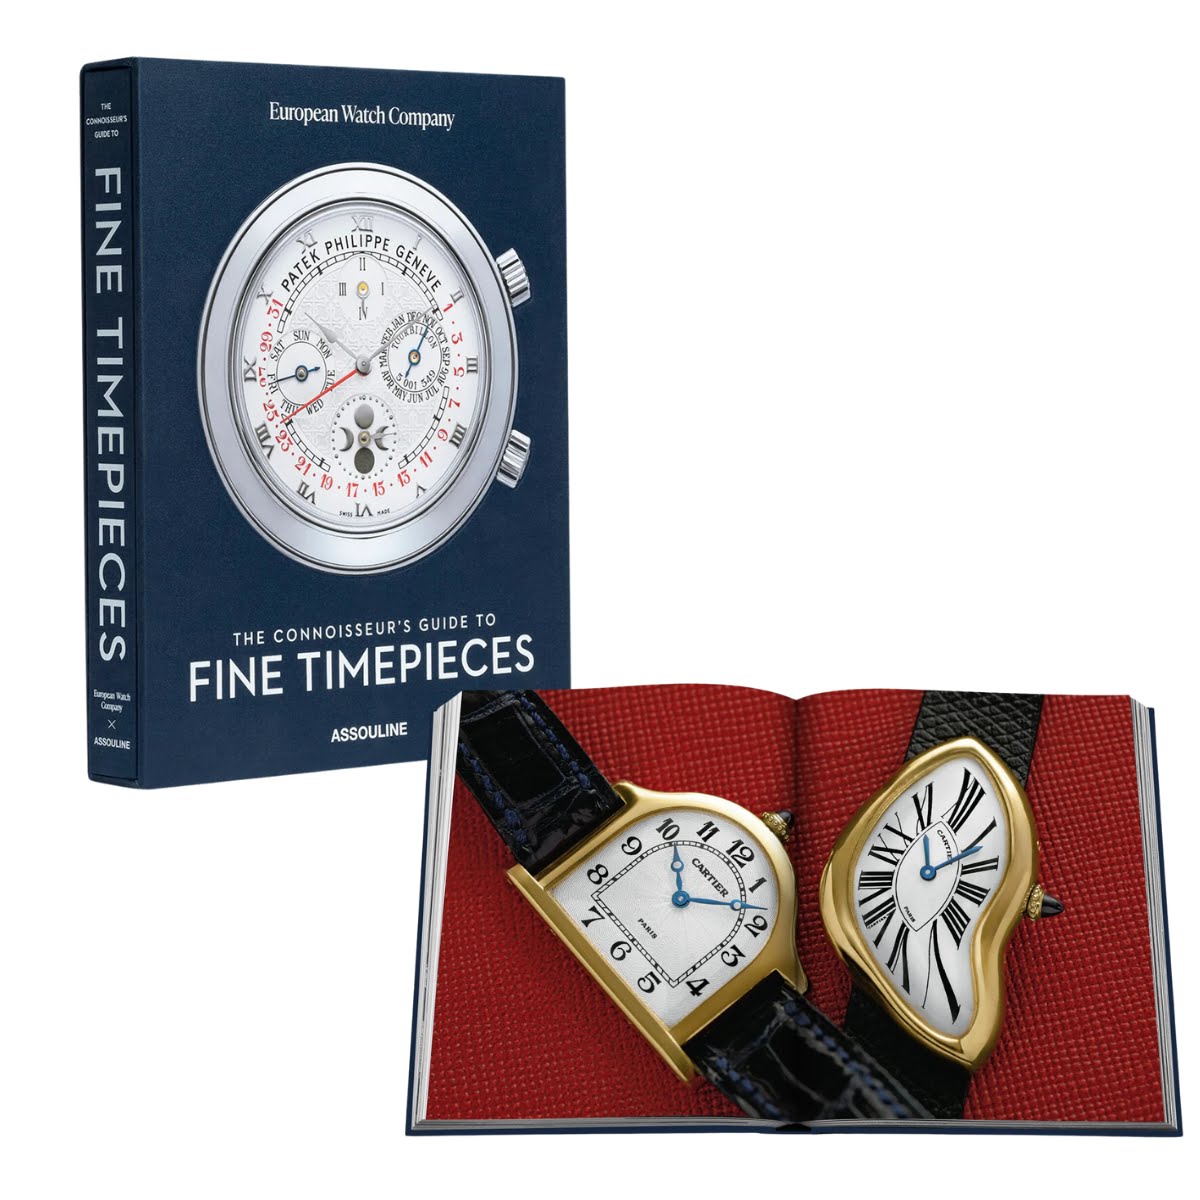 European Watch Company The Connoisseur’s Guide to Fine Timepieces, €195